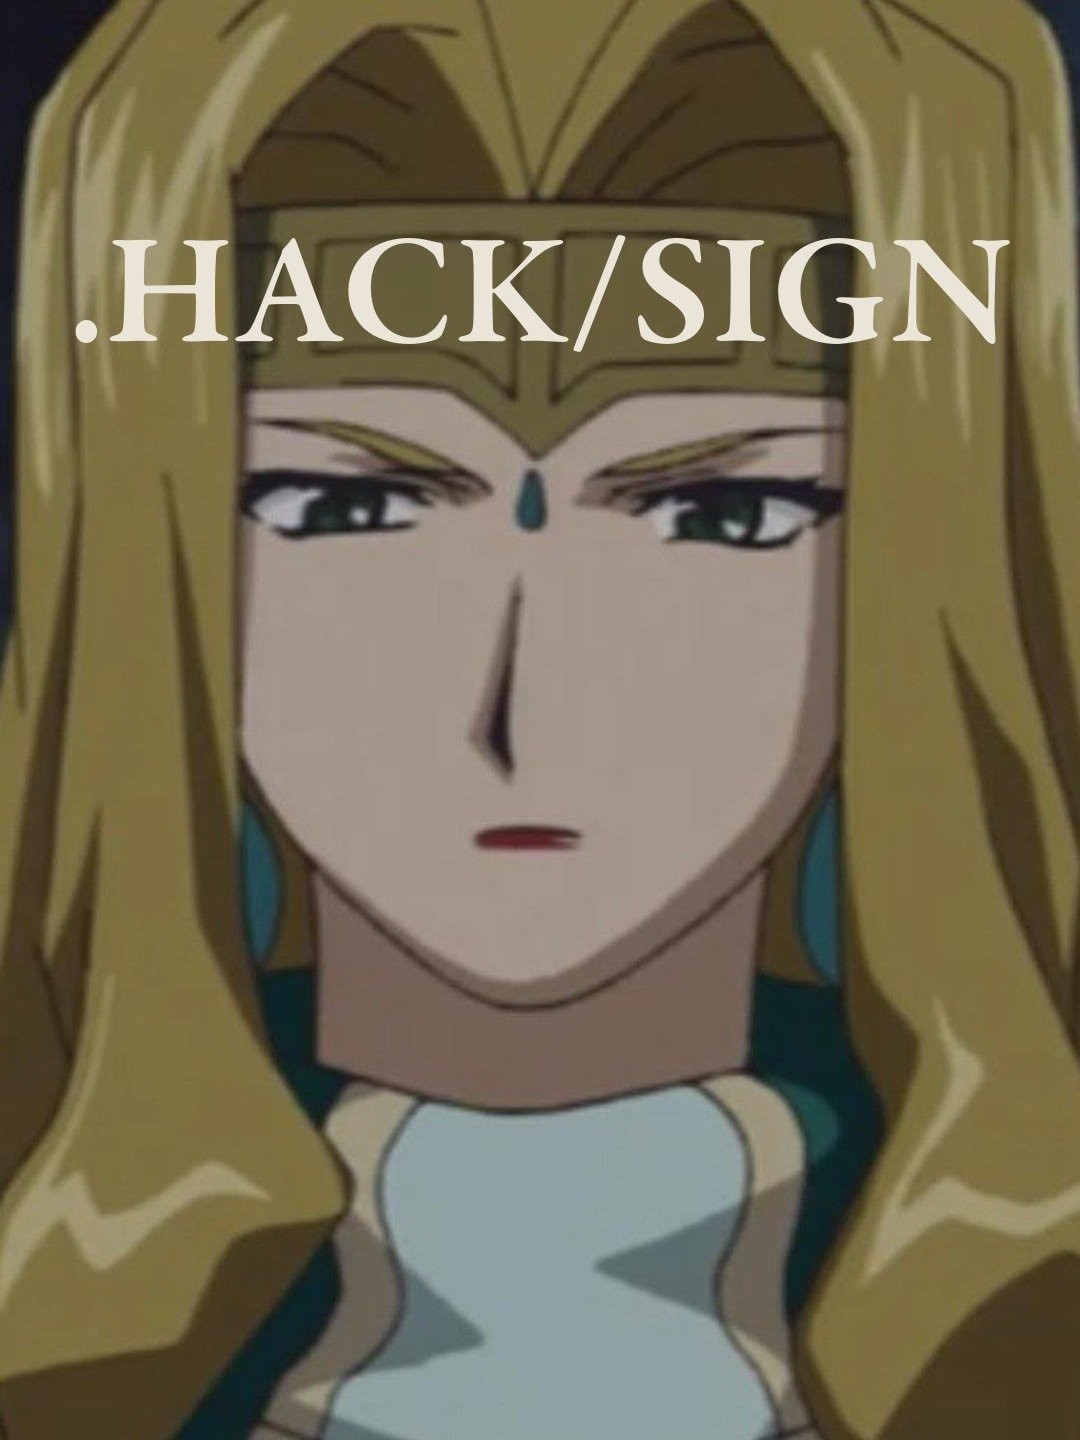 Anime Review: .hack//Sign